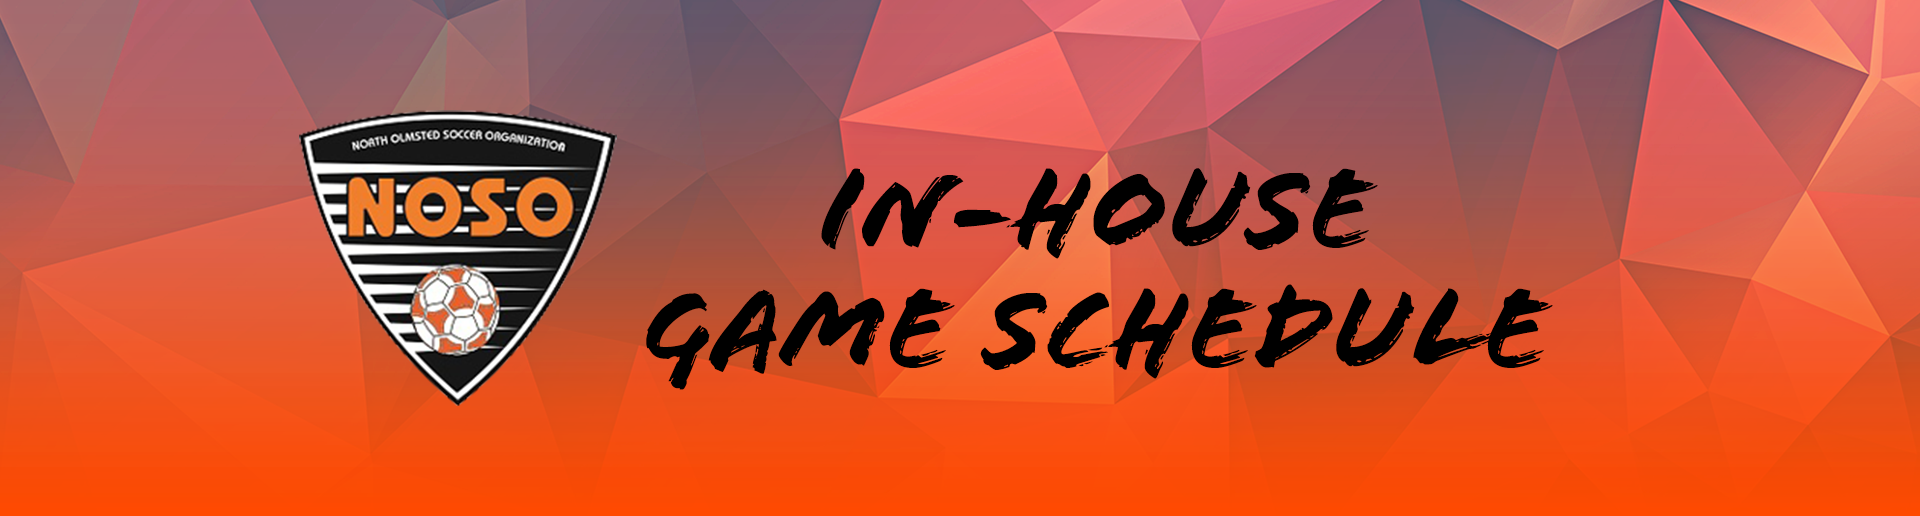 In-House Game Schedule